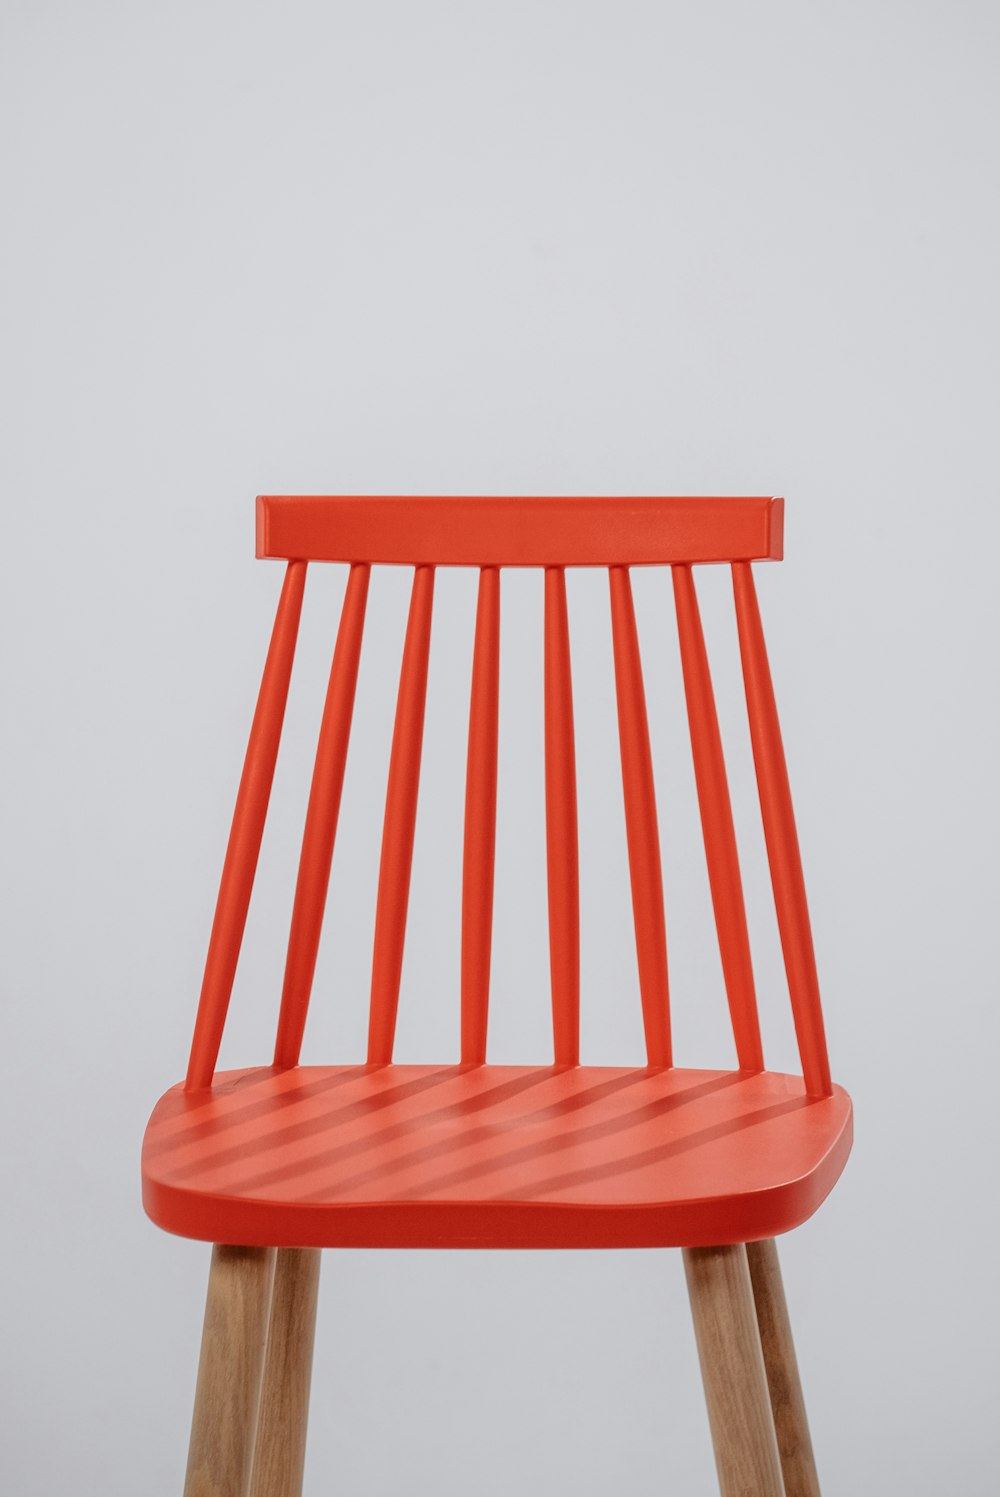 a red chair with wooden legs on a white background